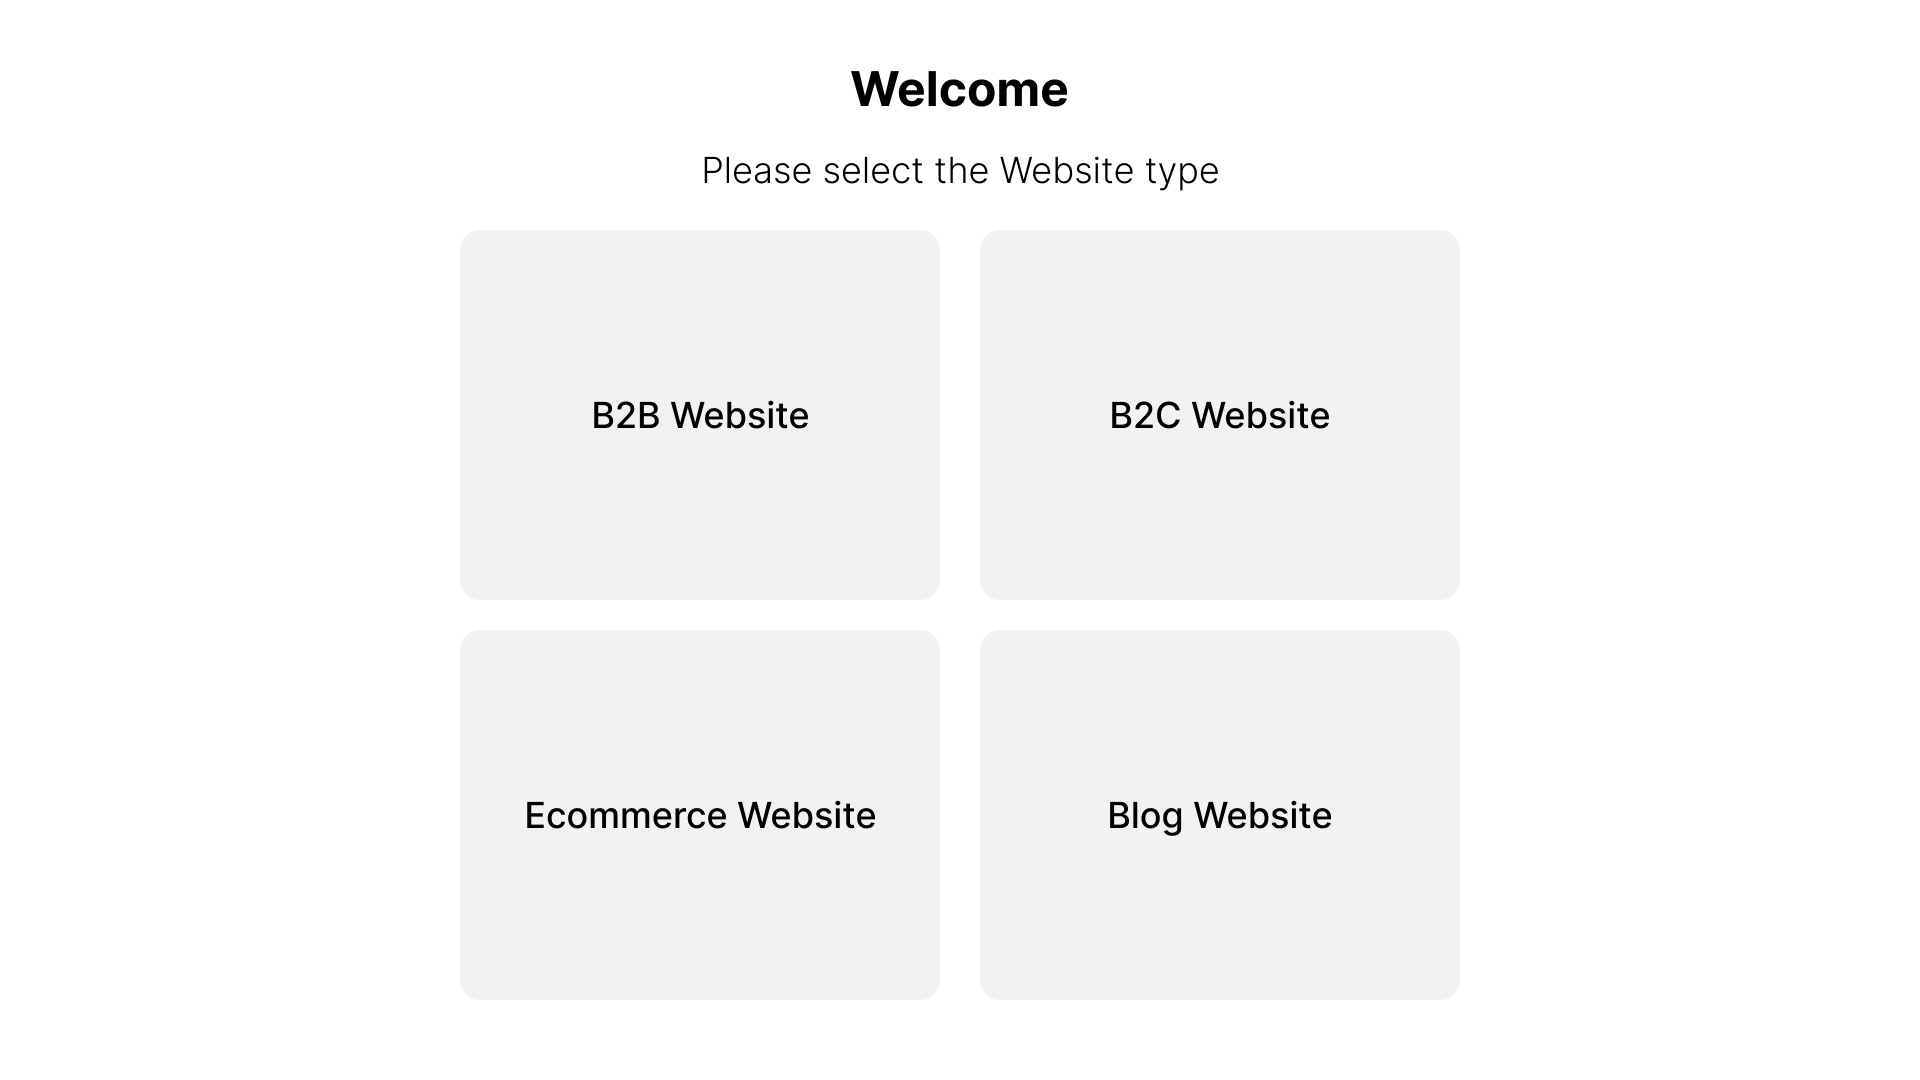 Step 1 - User Selects Website Type